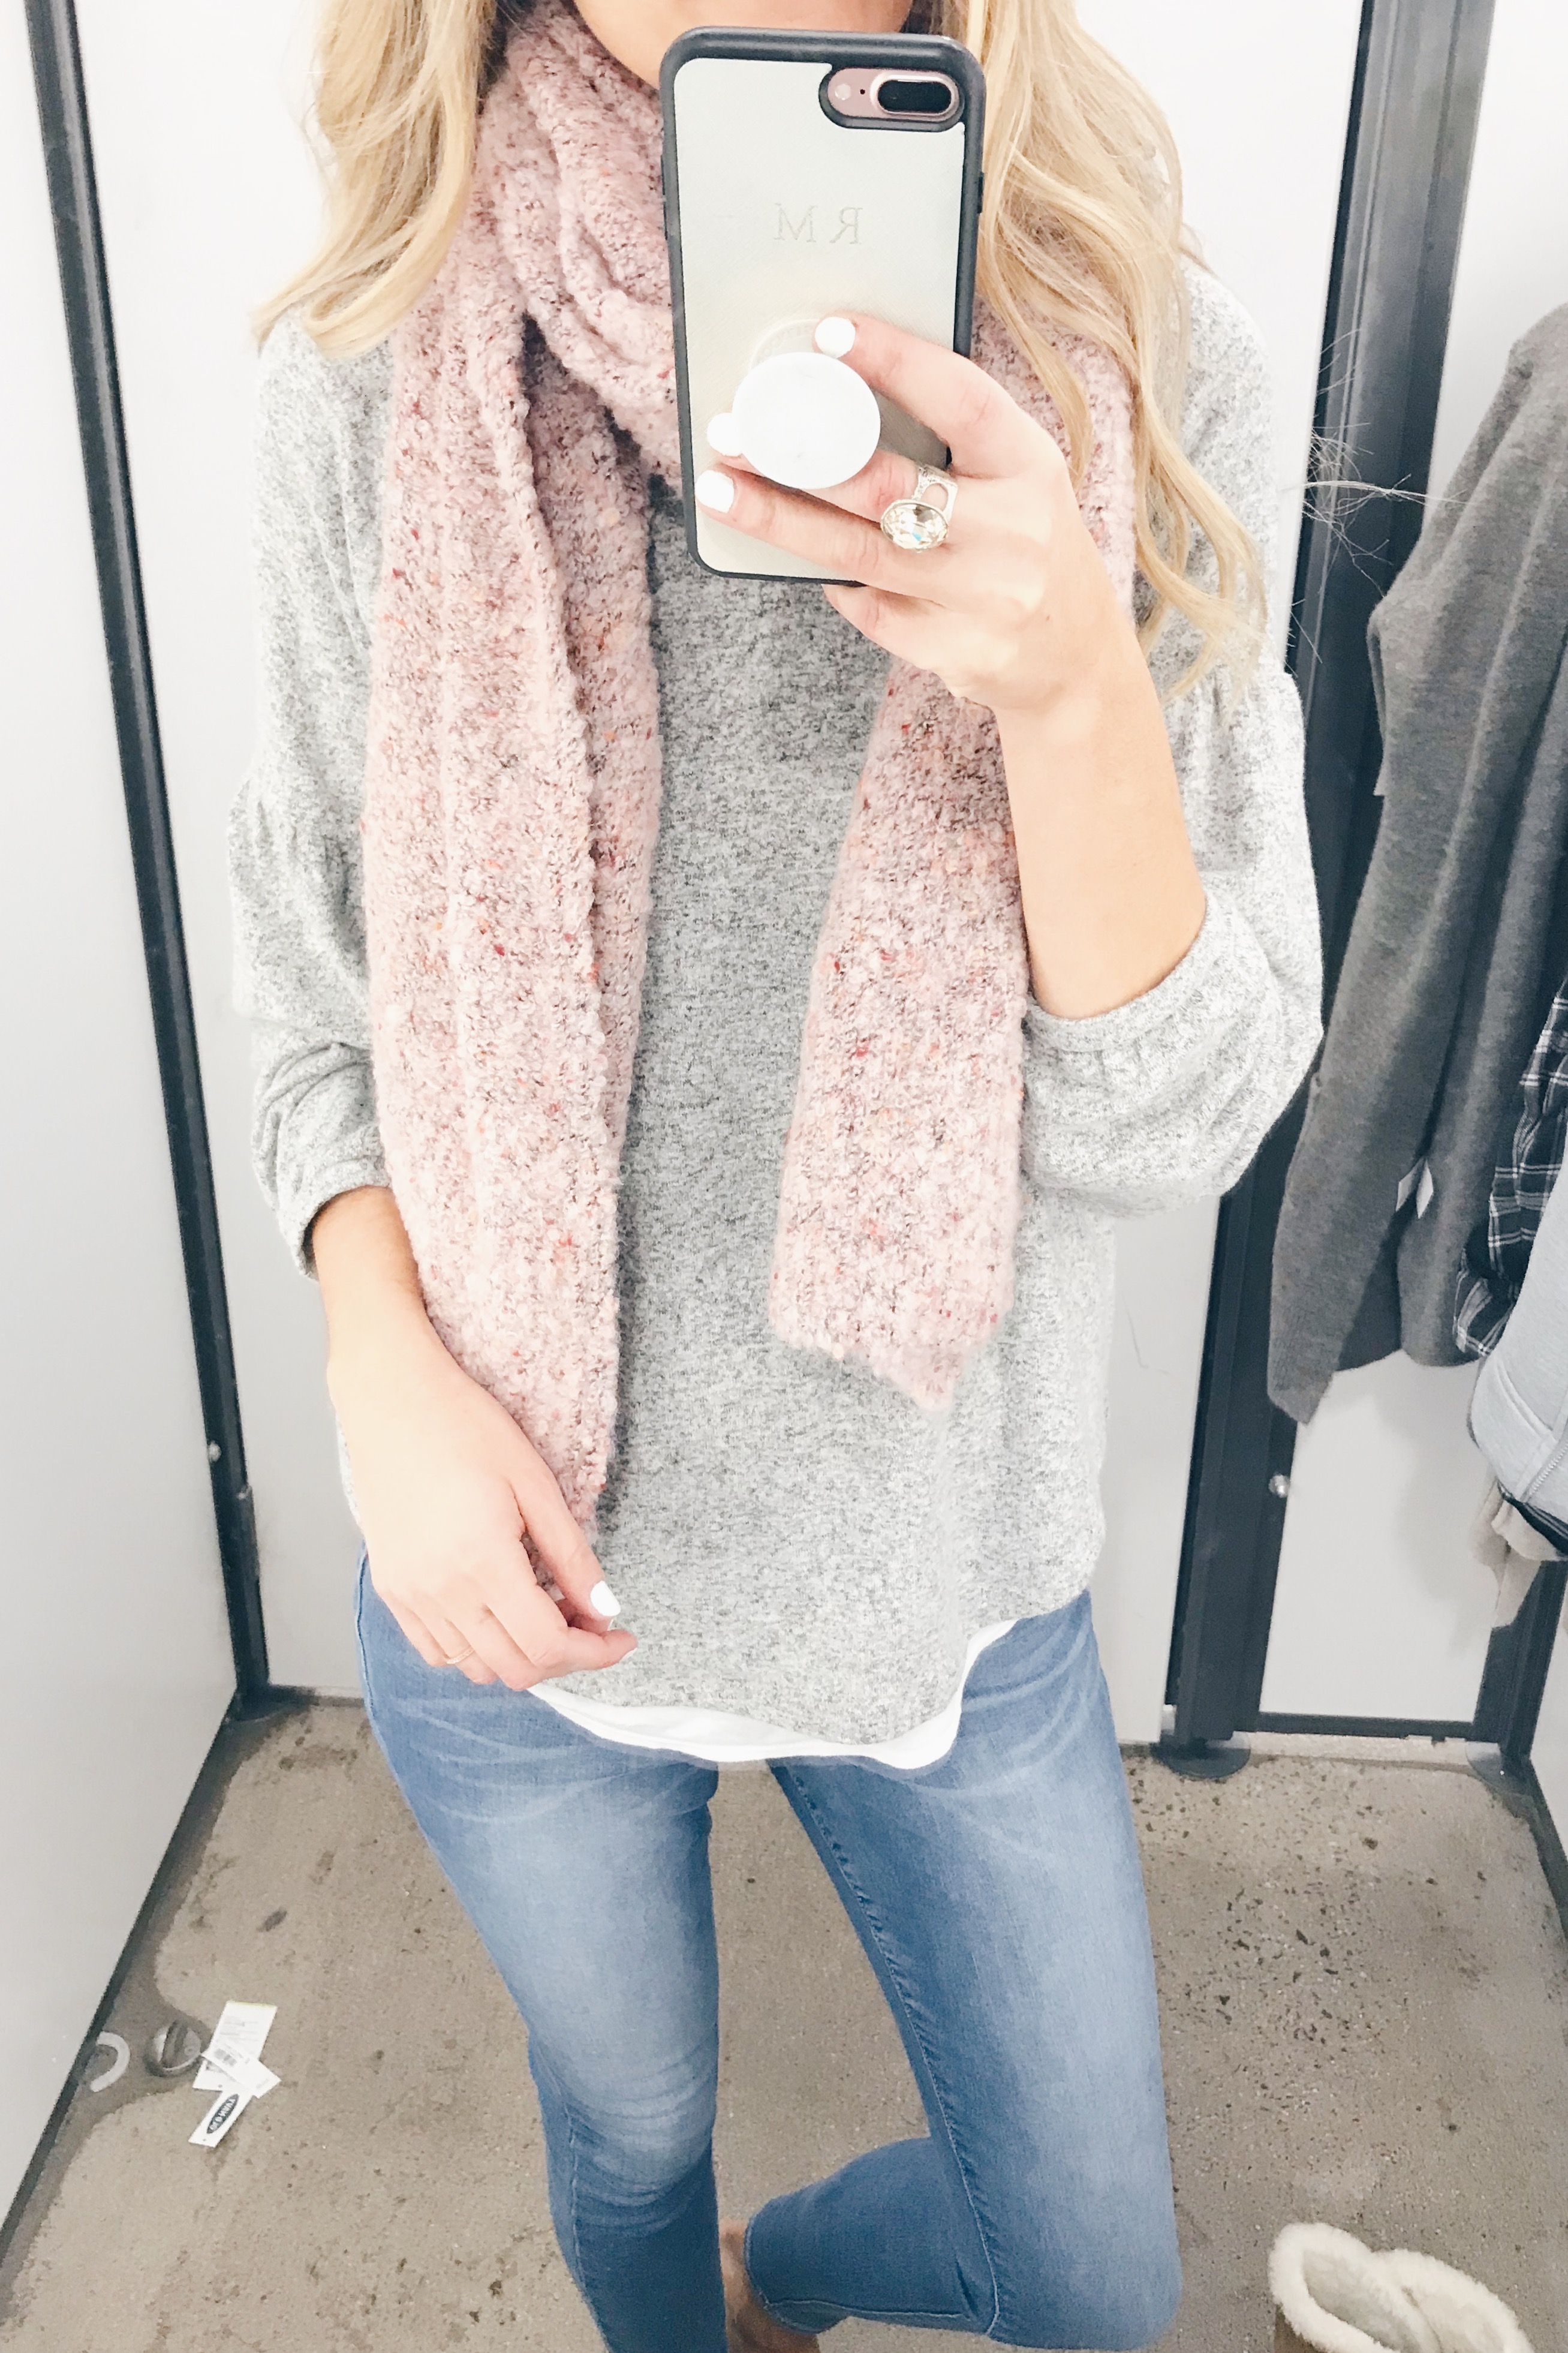 old navy friends and family sale try on - gray fleece top with pink scarf